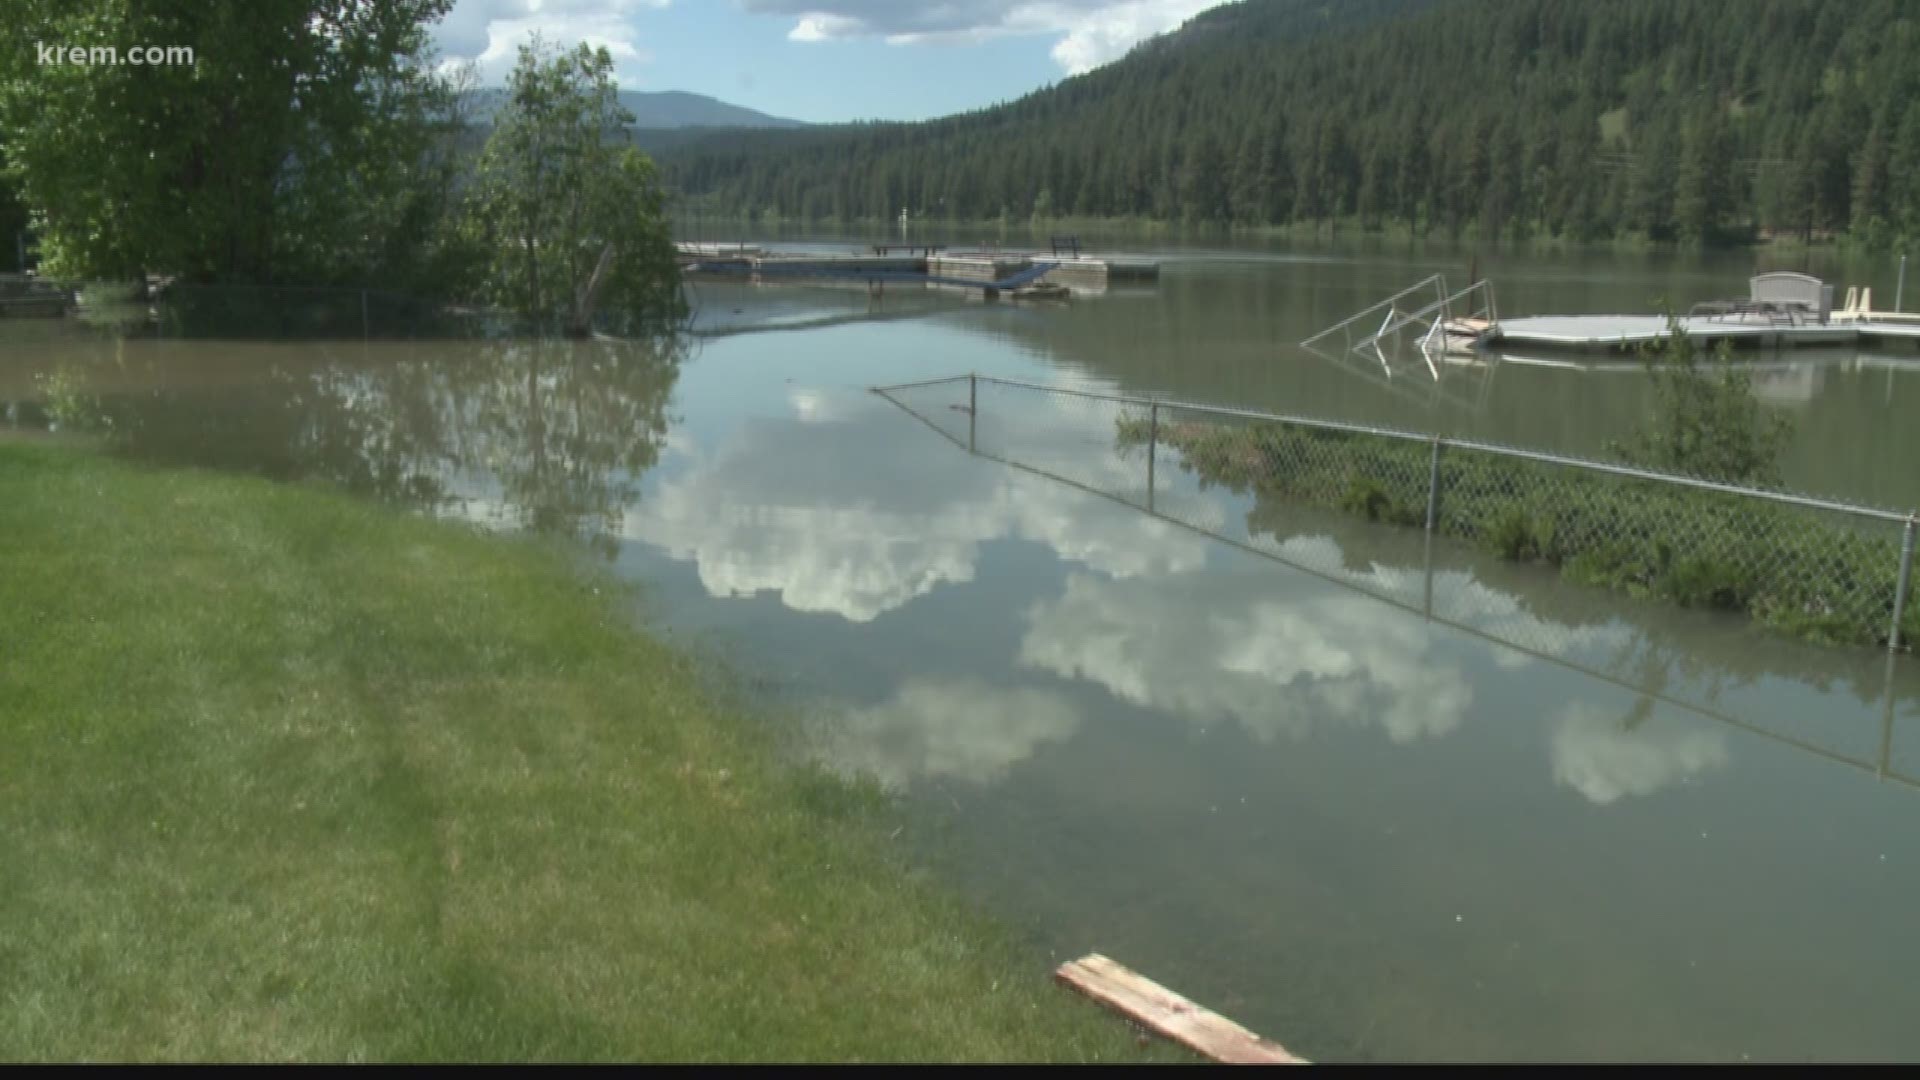 A woman who lives along the Pend Oreille River near Cusick is praising workers who kept her cabin from flooding. She says after the workers saw how close the water was to her home, they made protecting it their priority. (5-22-18)